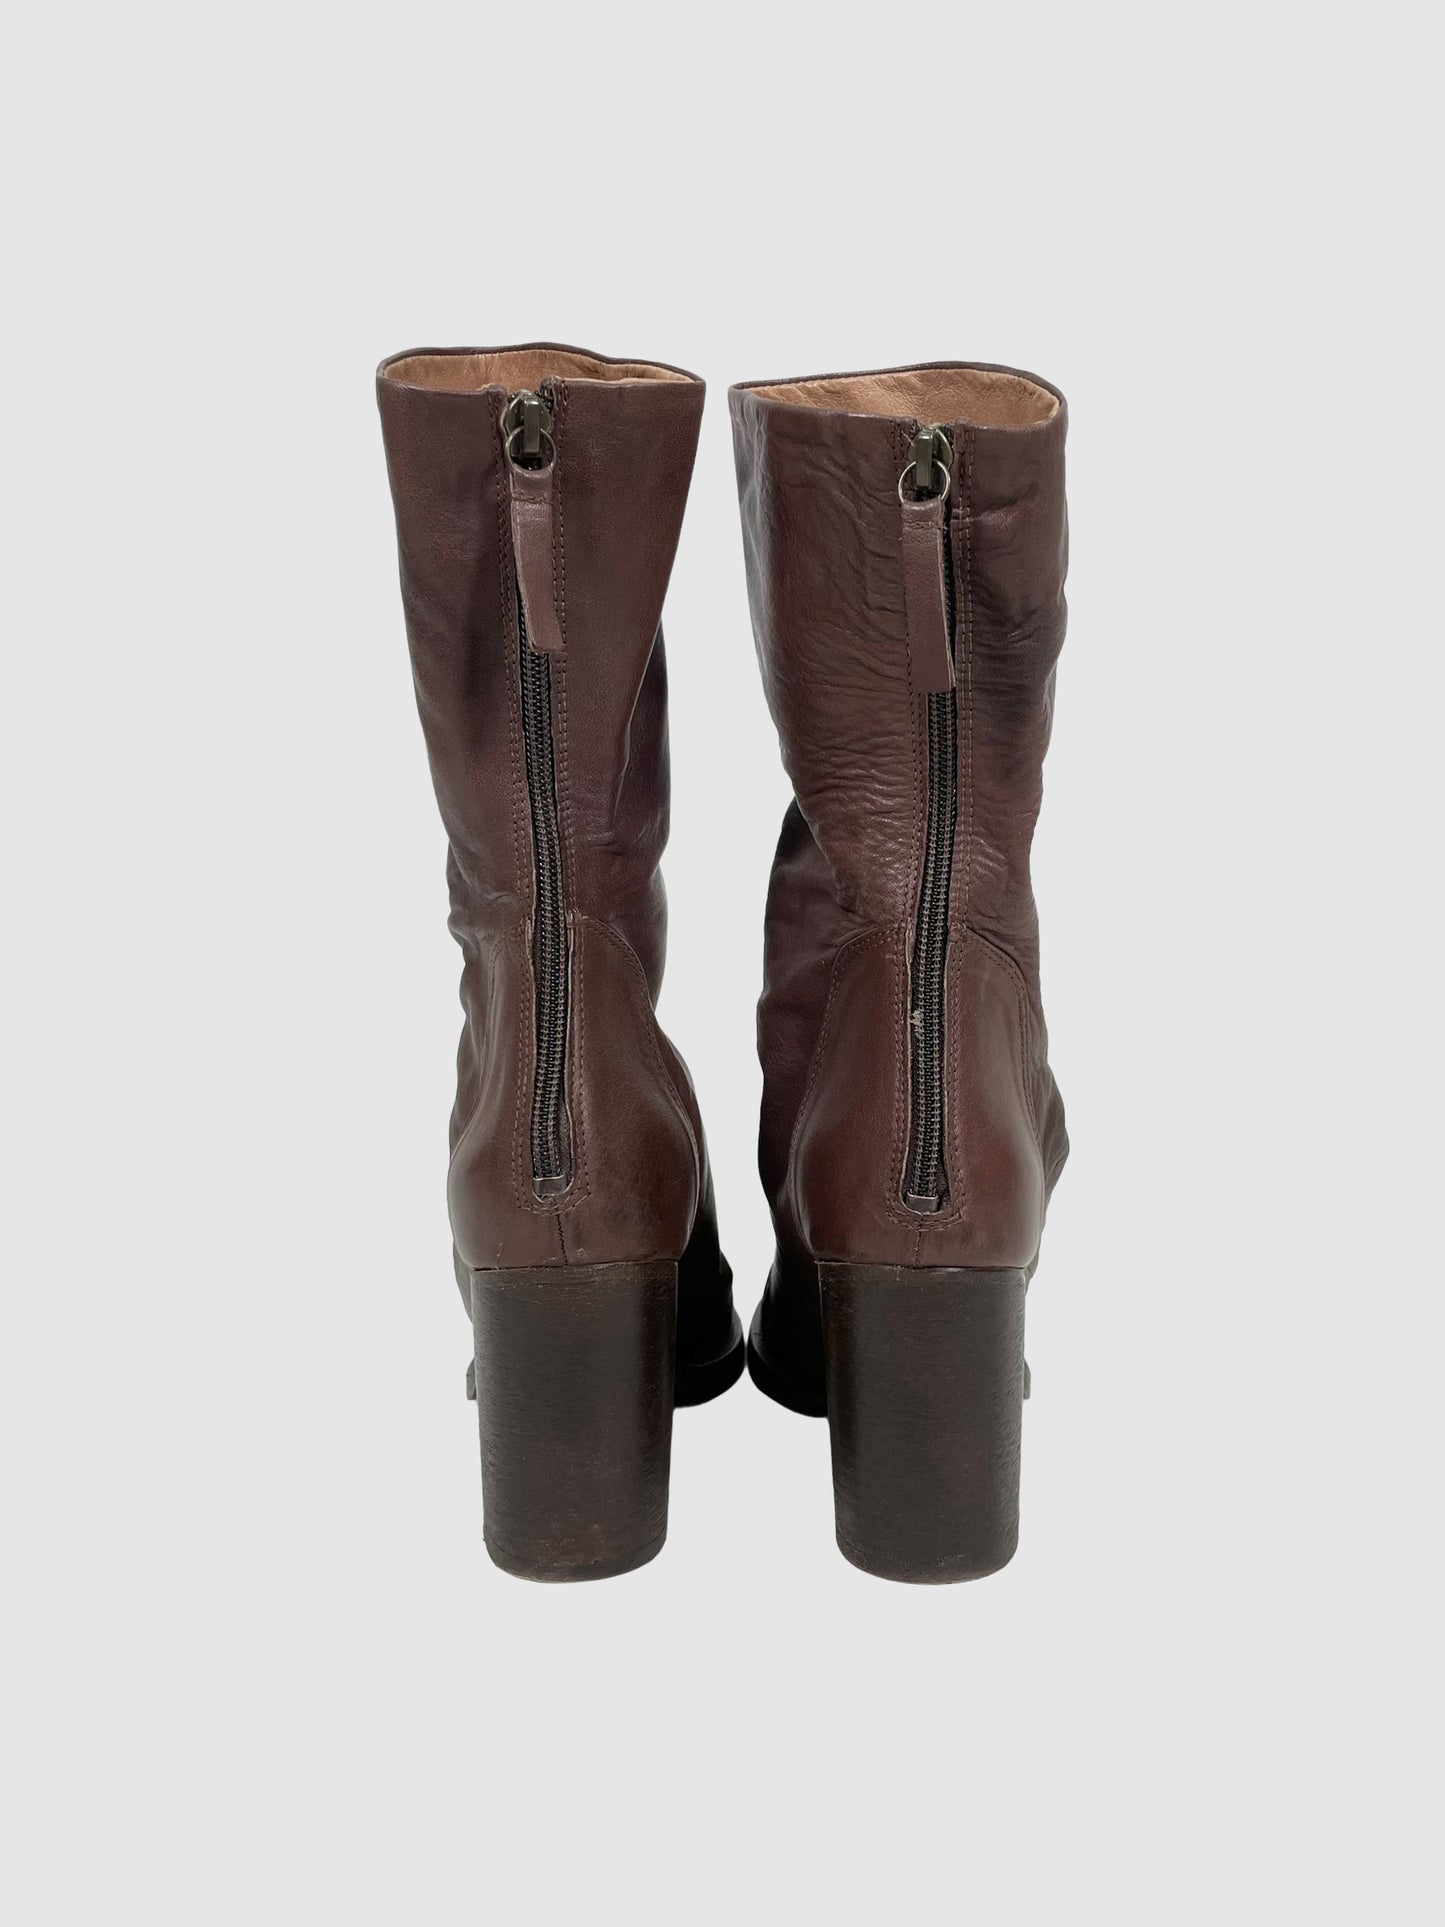 Free People Tall Leather Boots - Size 38